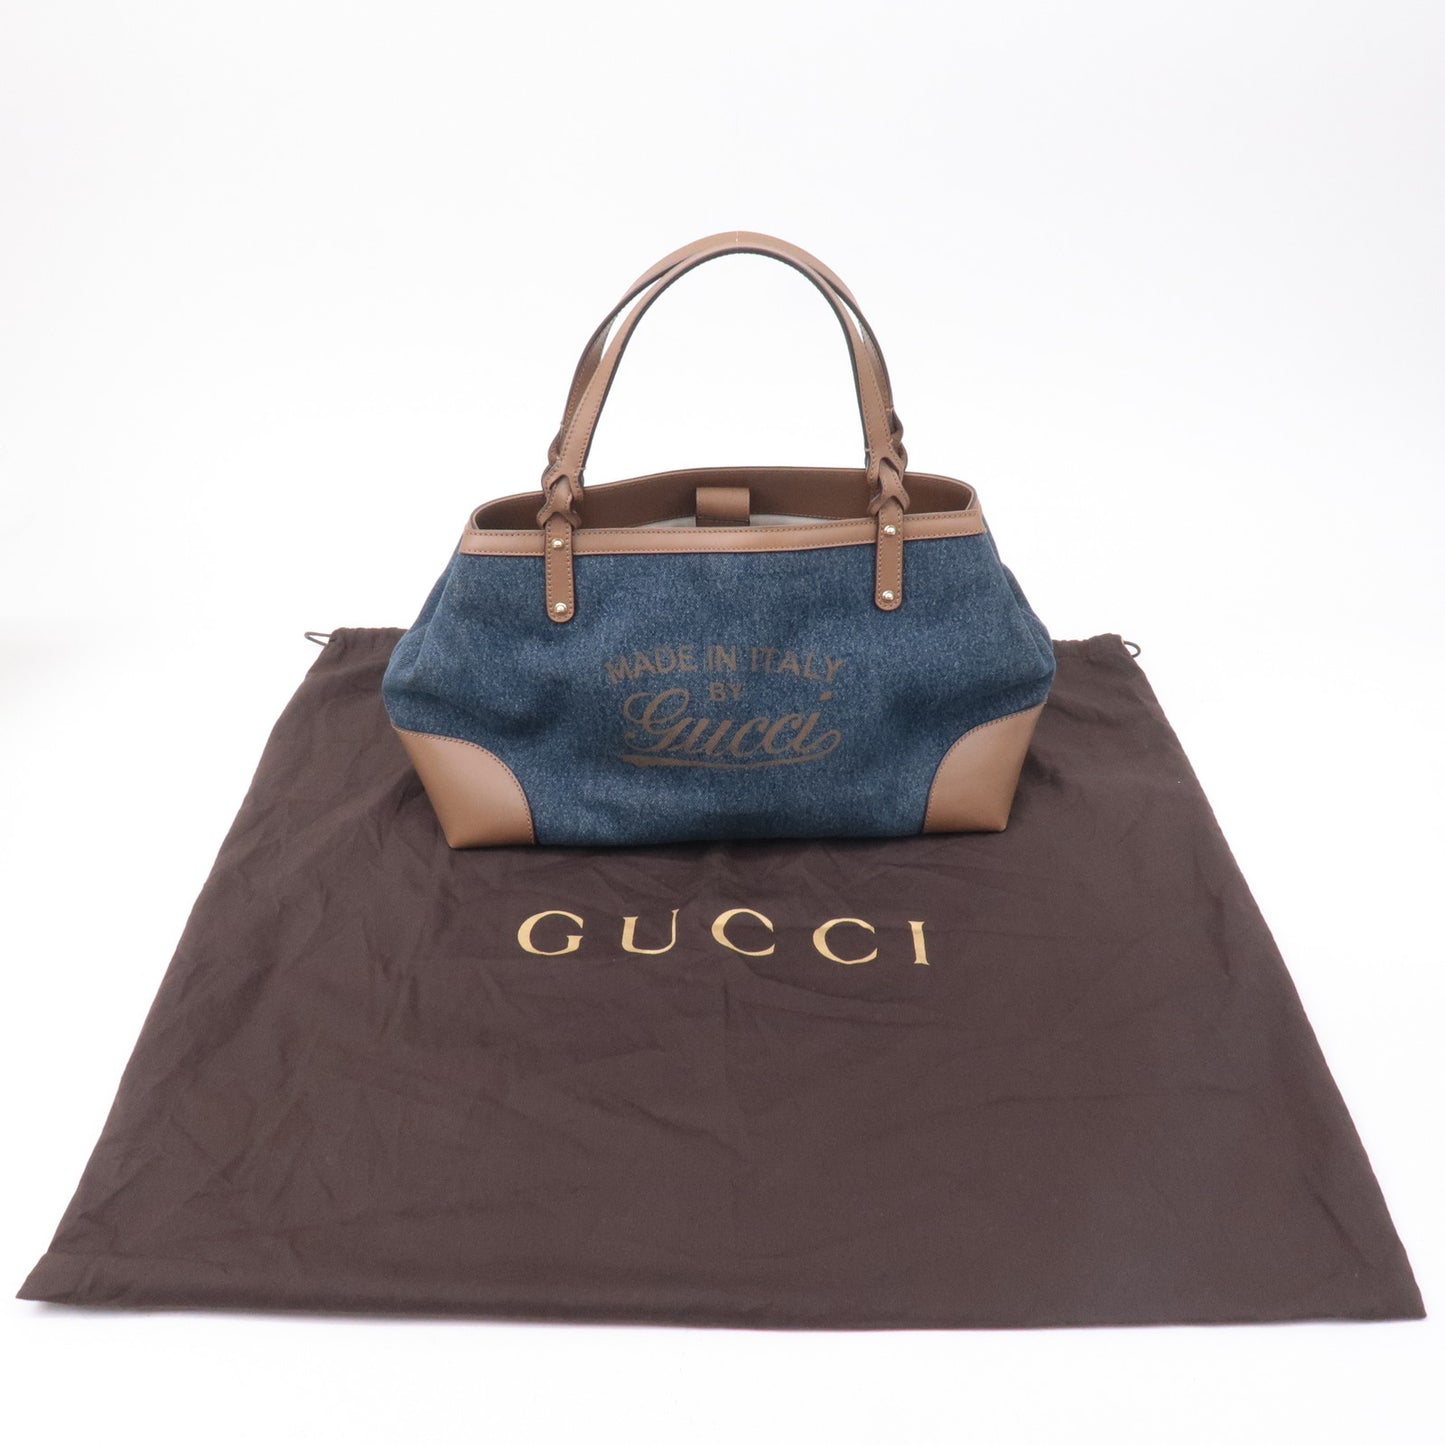 GUCCI Craft Denim Leather Tote Bag Hand Bag Navy Brown 348715